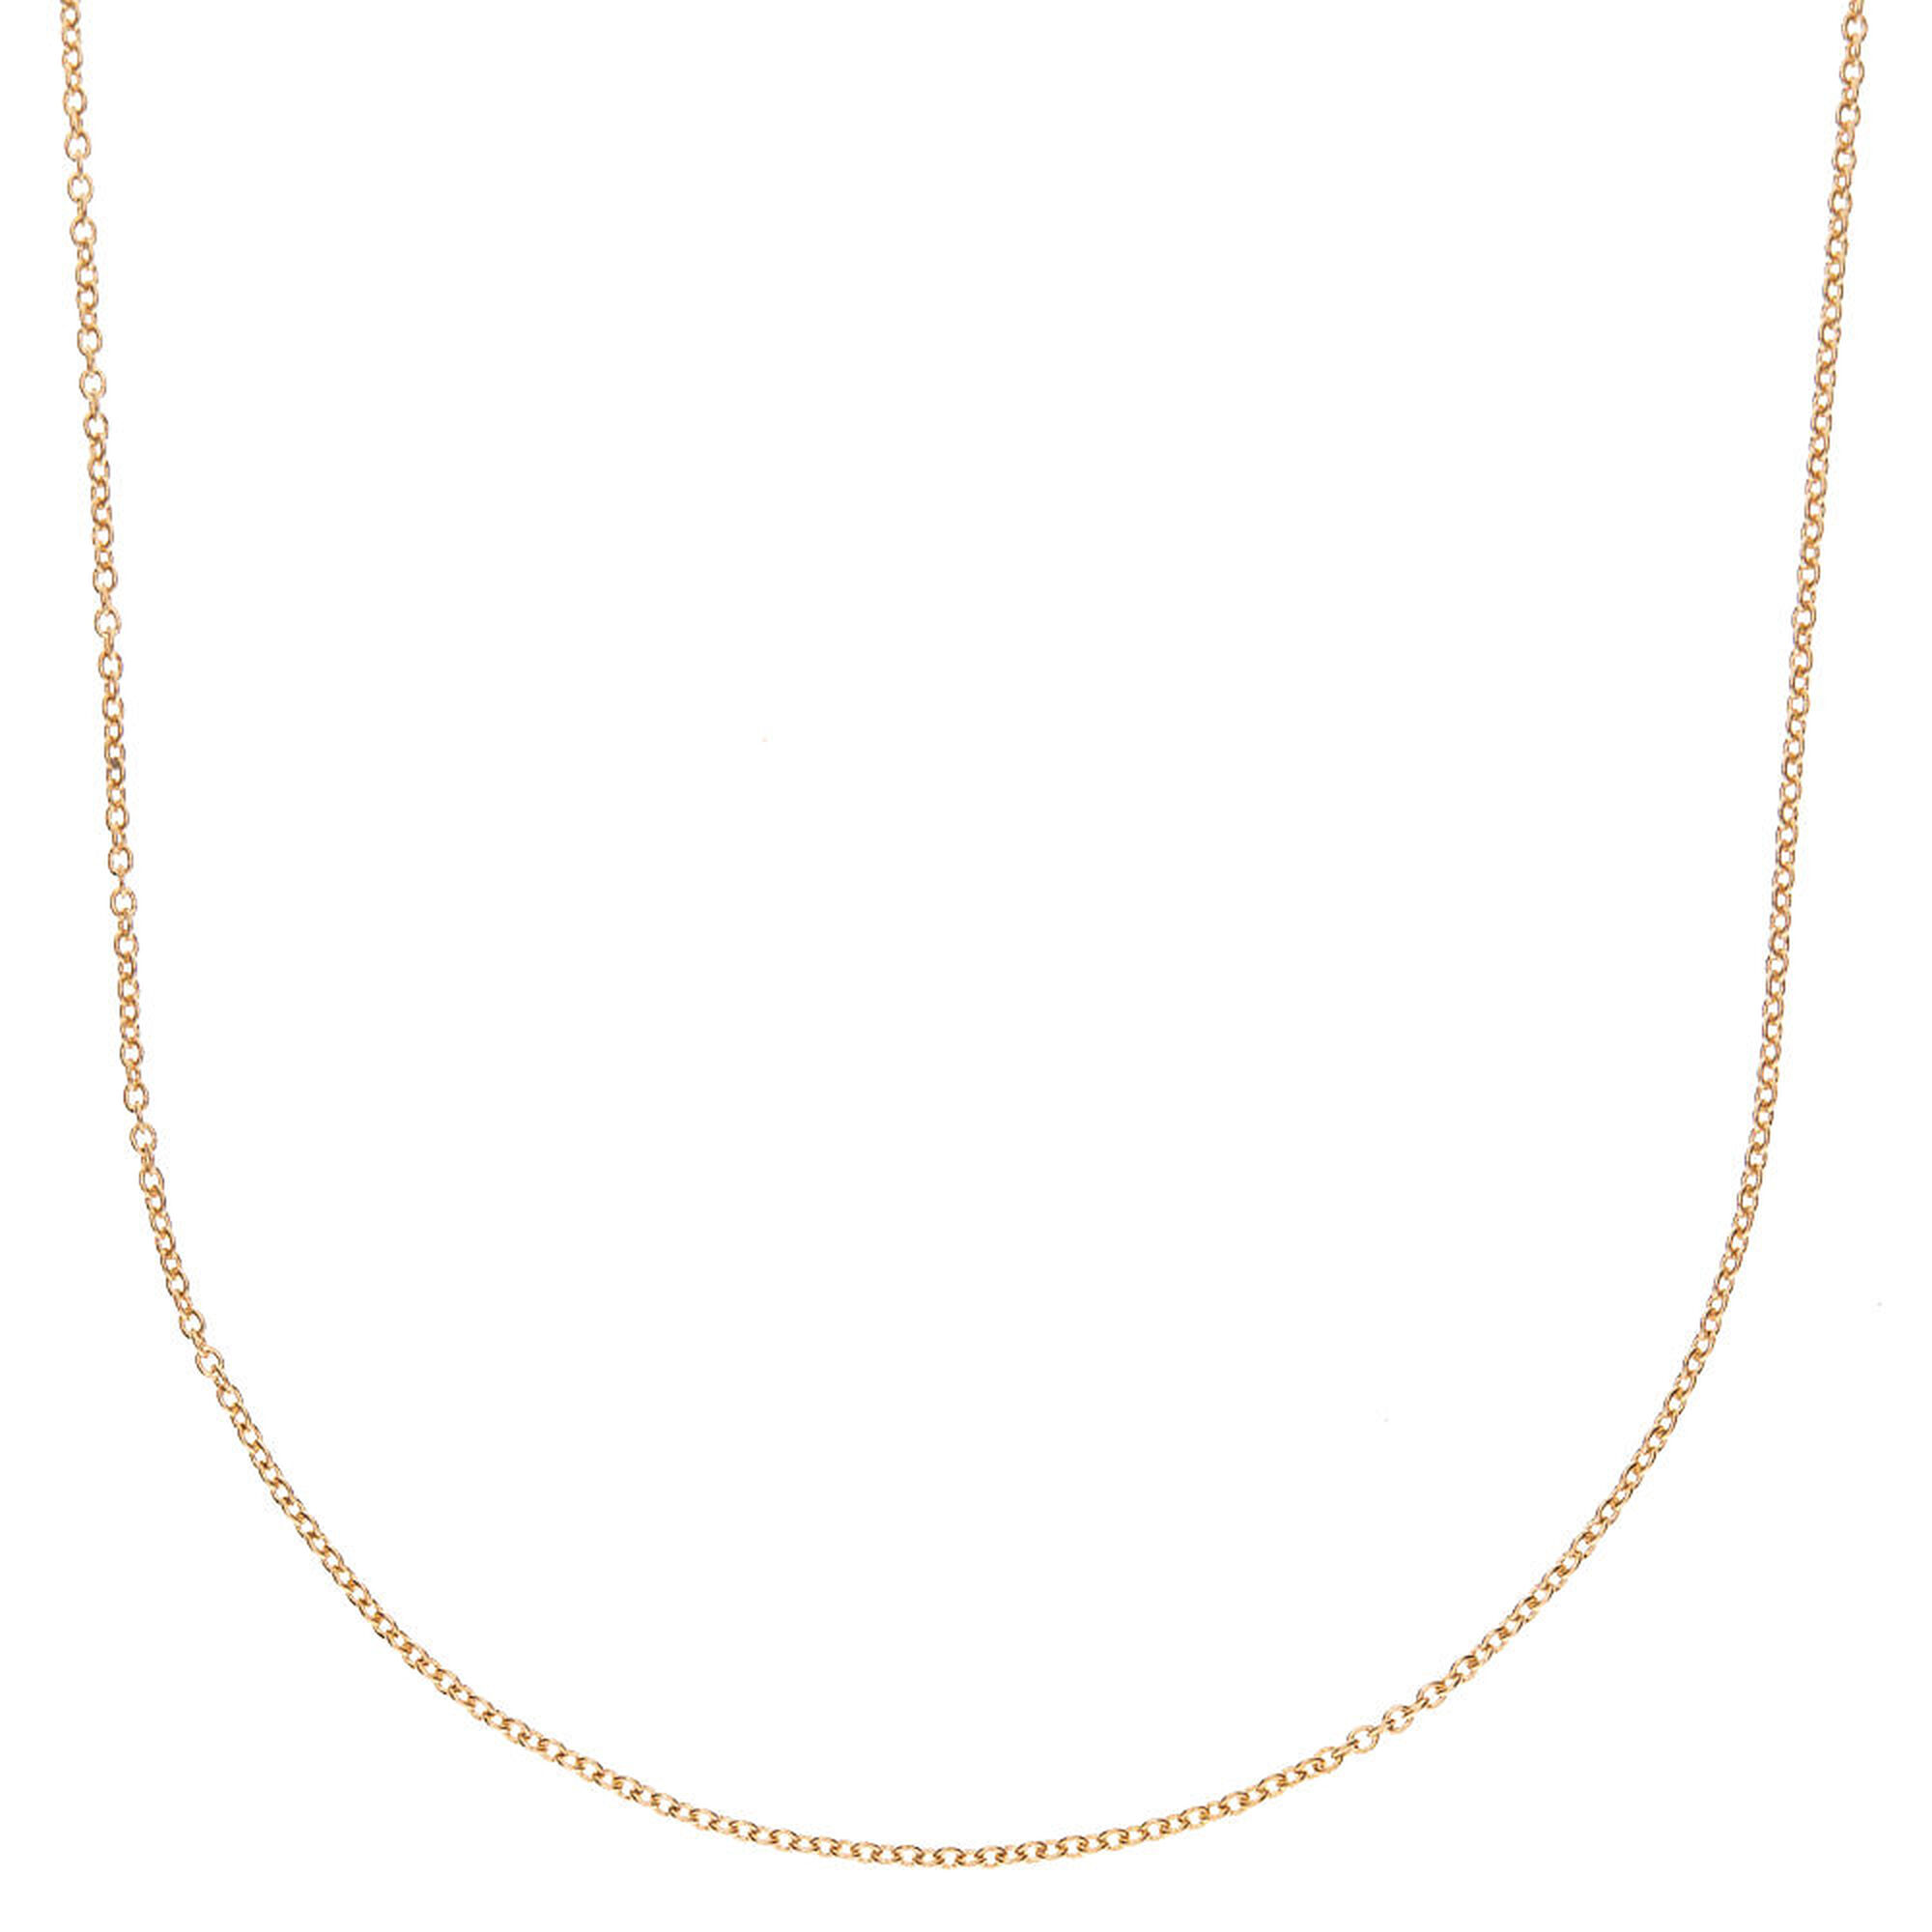 Gold Necklace Chain | Claire's US